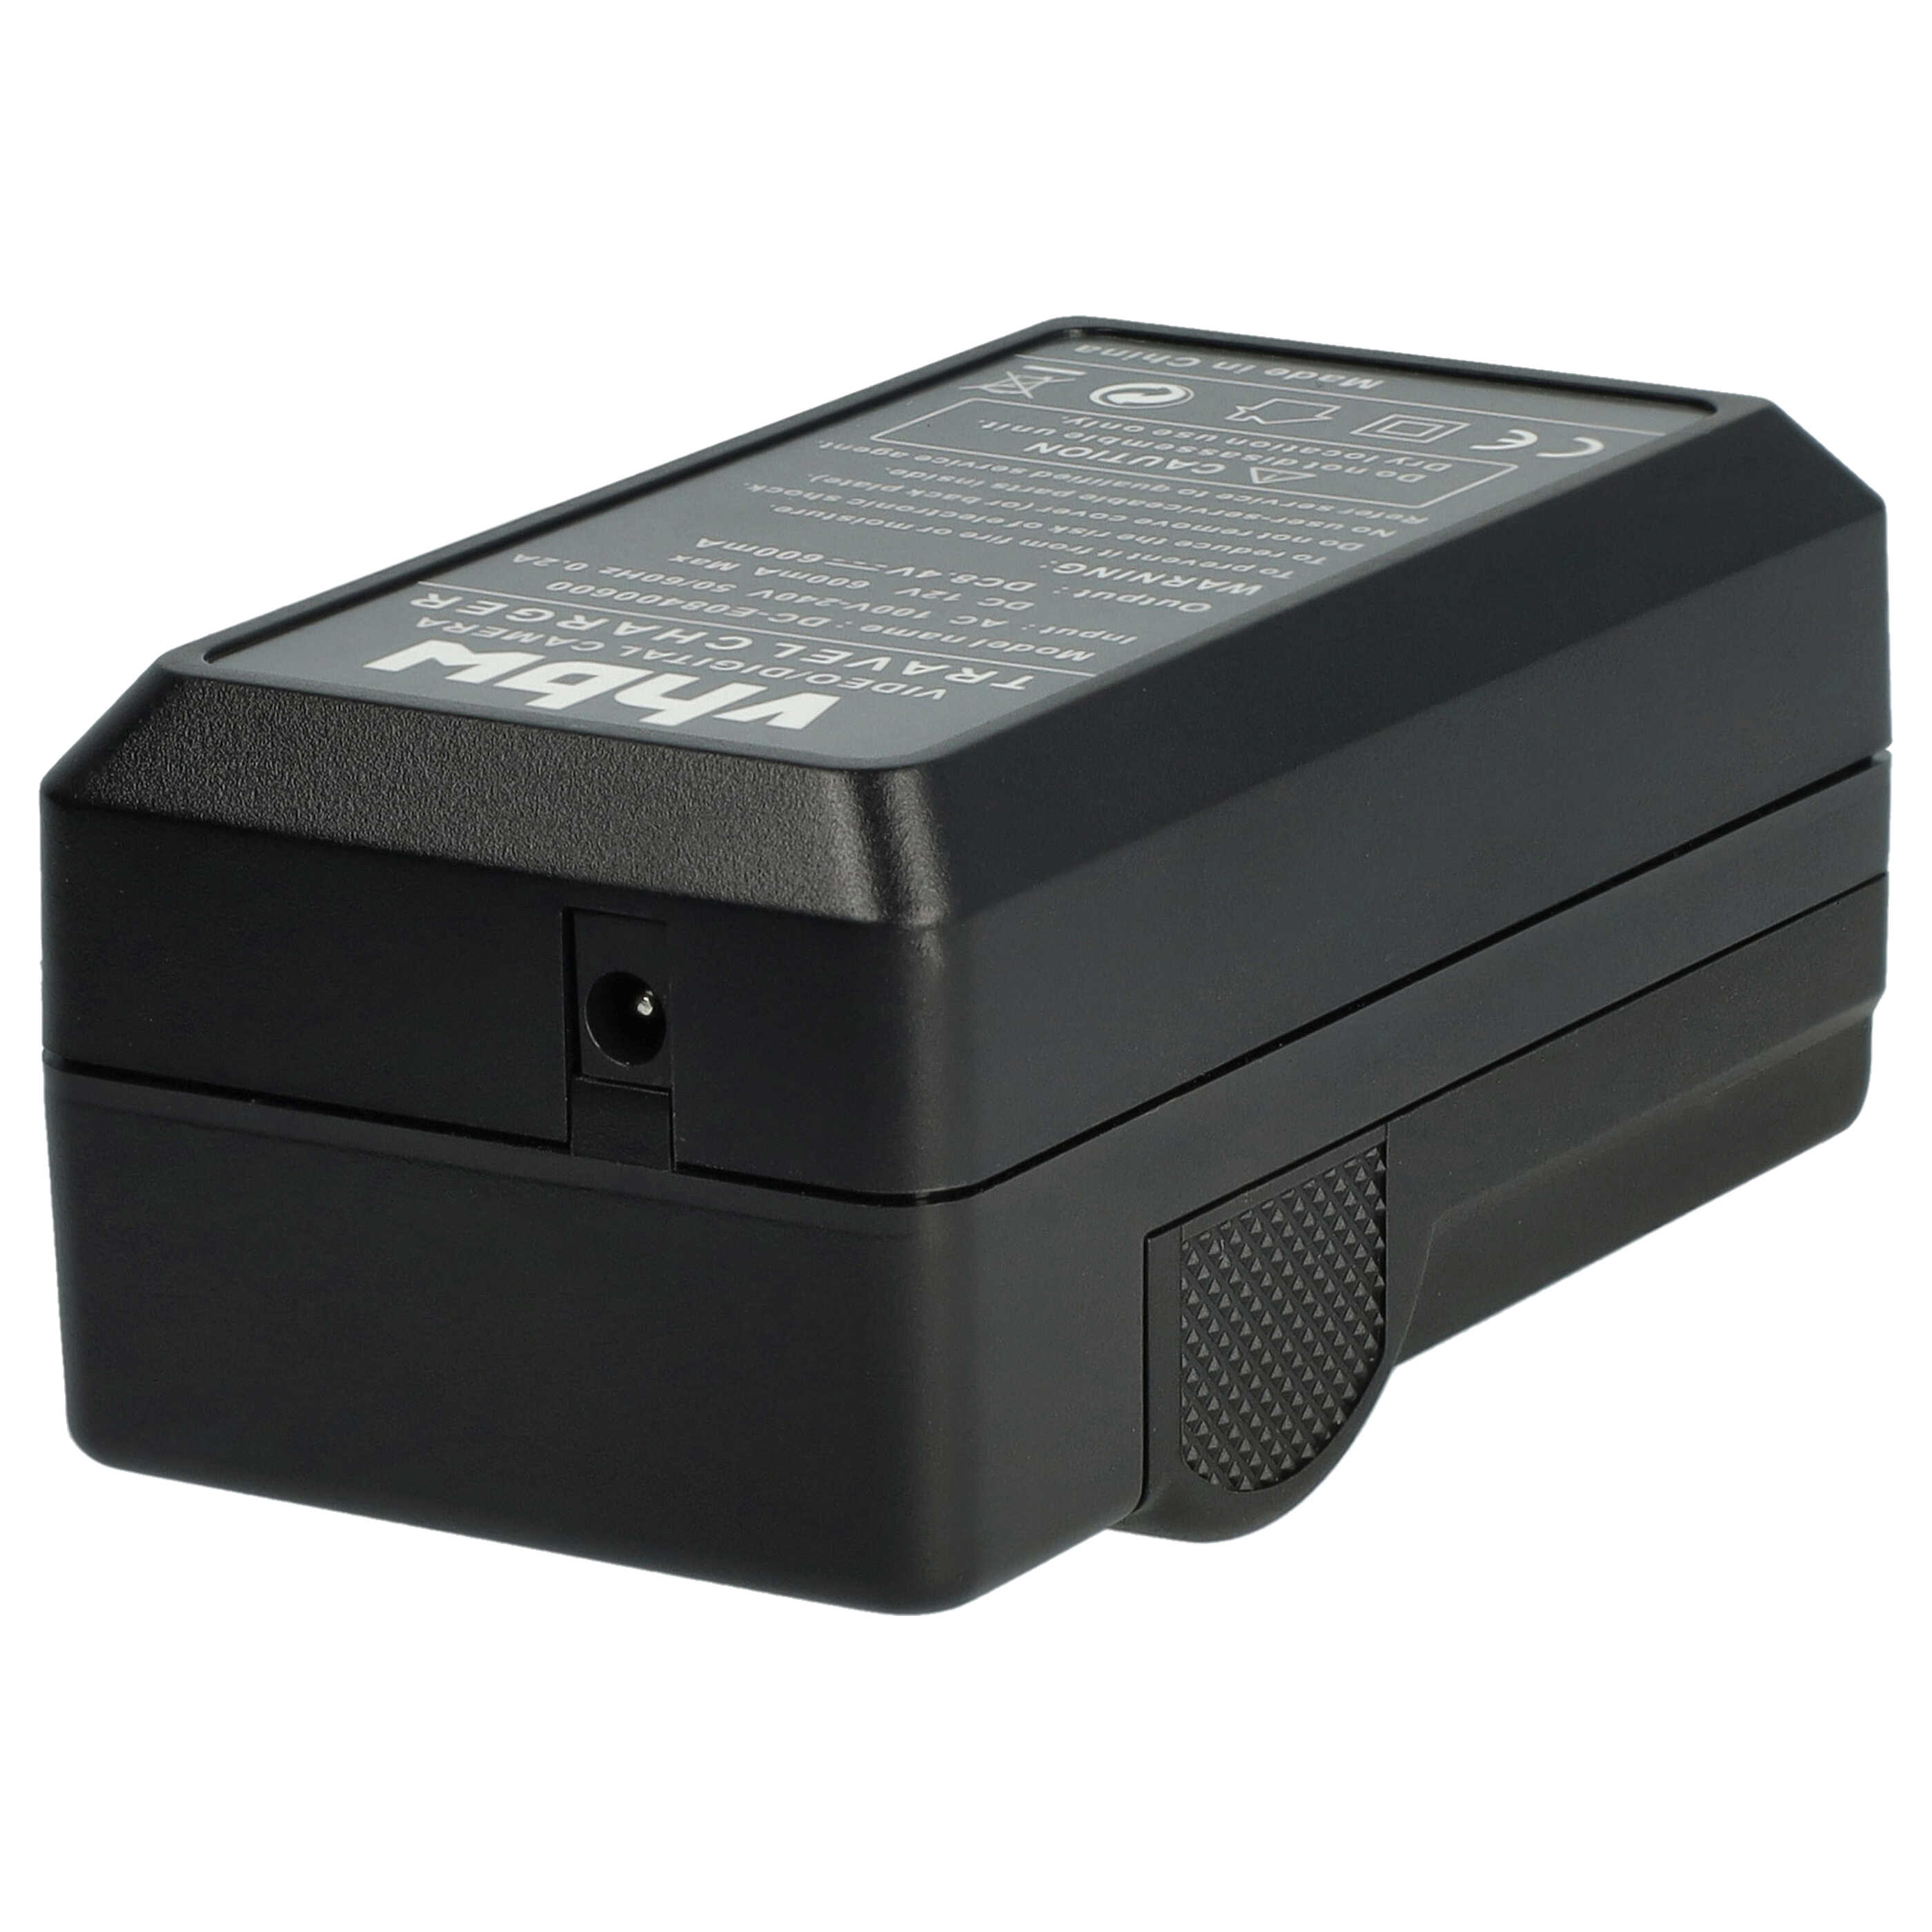 Battery Charger suitable for Samsung BP-1310 Camera etc. - 0.6 A, 8.4 V